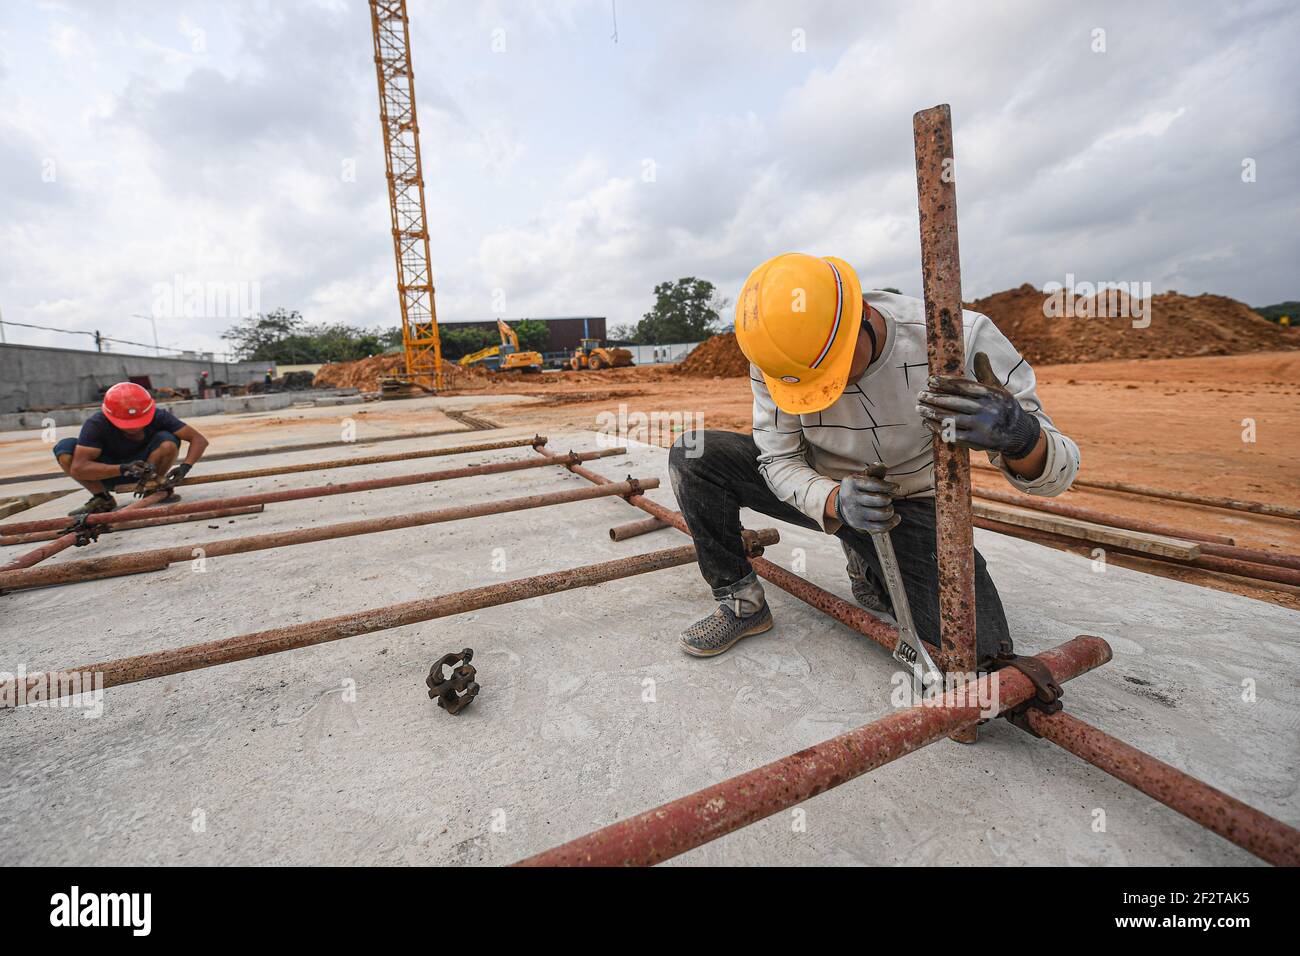 Wenchang, China's Hainan Province. 13th Mar, 2021. Workers work at the construction site of an aerospace supercomputing center project in Wenchang, south China's Hainan Province, March 13, 2021. The project is one of the key parts of the construction of the Hainan Free Trade Port. Credit: Pu Xiaoxu/Xinhua/Alamy Live News Stock Photo